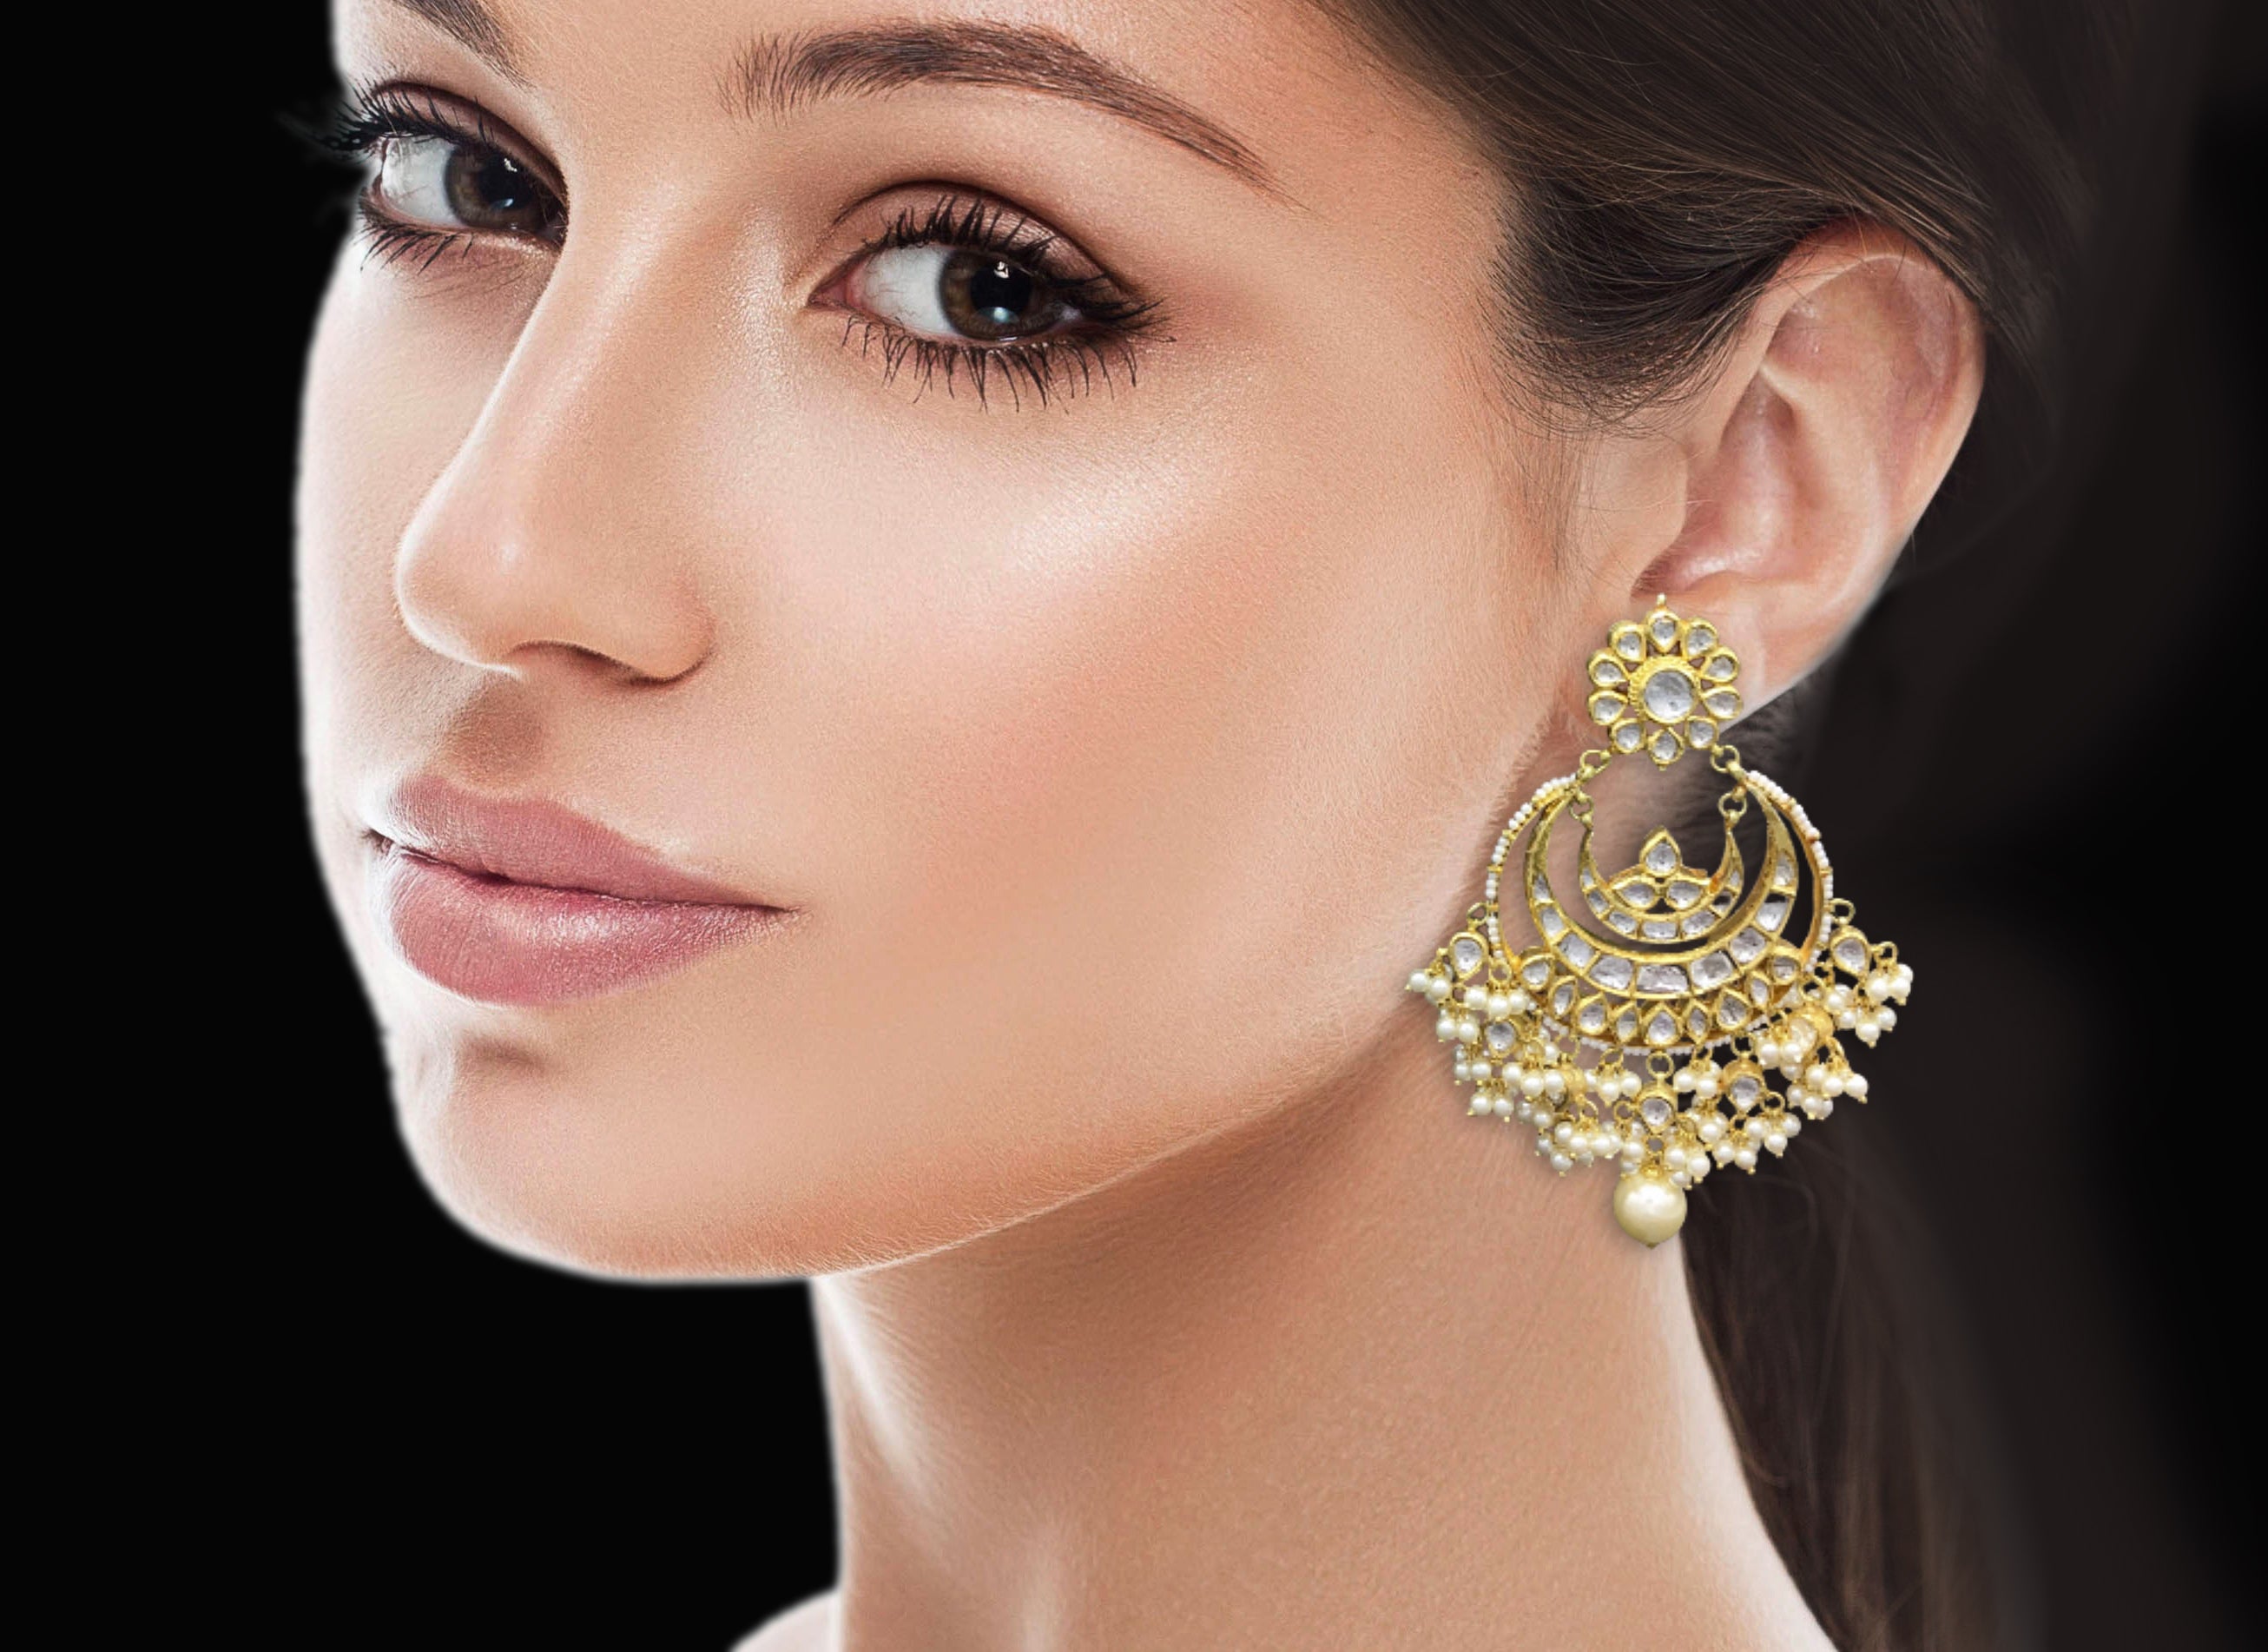 18k Gold and Diamond Polki Round multi-tier Chand Bali Earring Pair with pearls